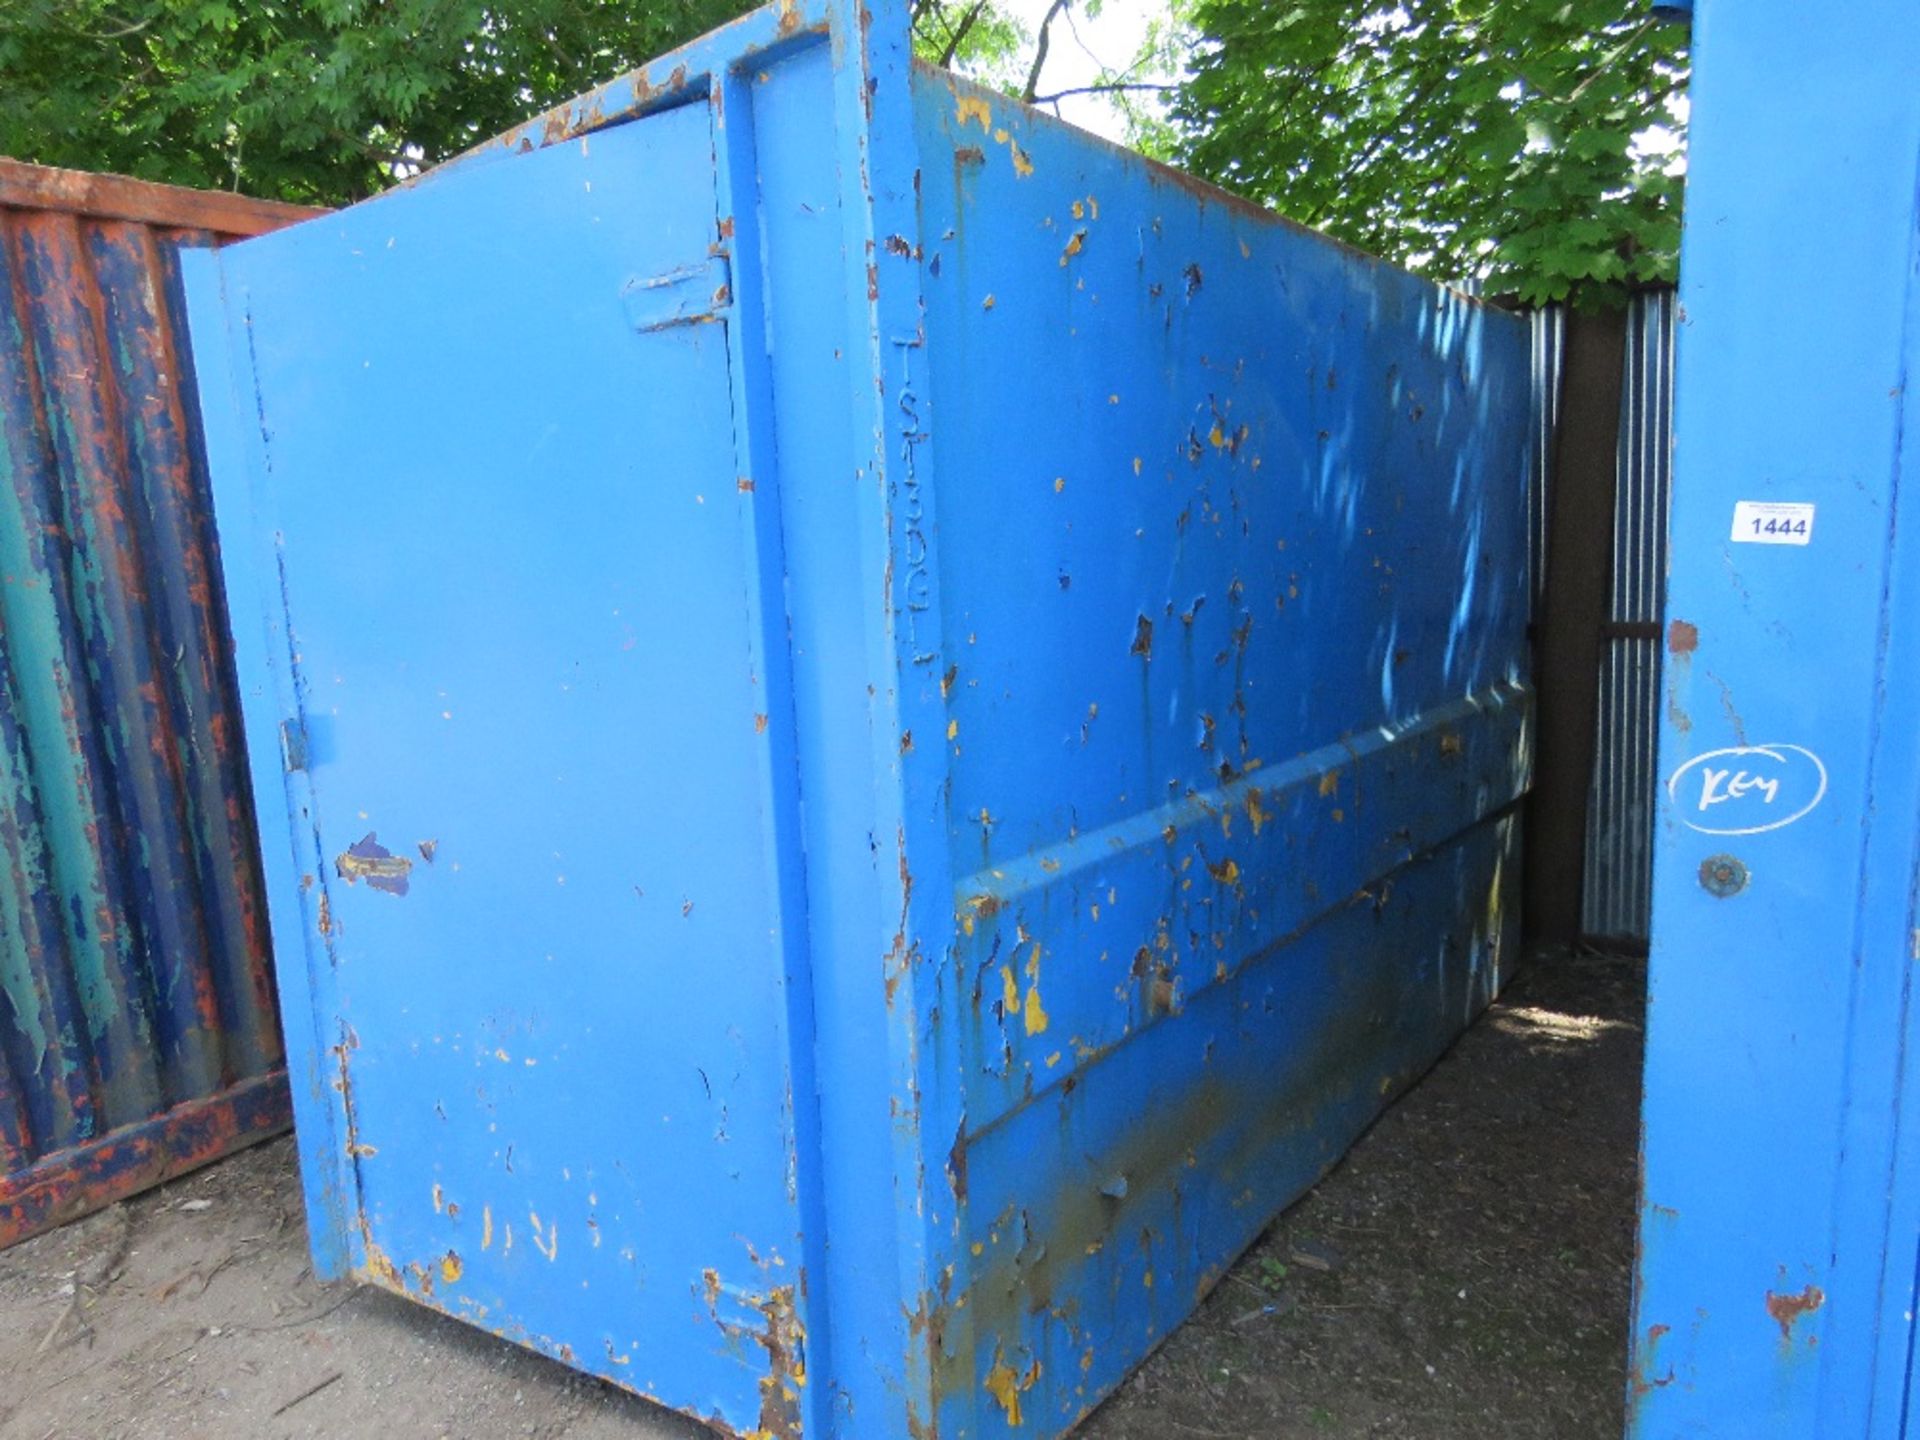 CHAIN LIFT SKIP TYPE ENCLOSED STORAGE CONTAINER 6FT WIDE X 10FT LENGTH APPROX WITH KEY. TS13. - Image 3 of 5